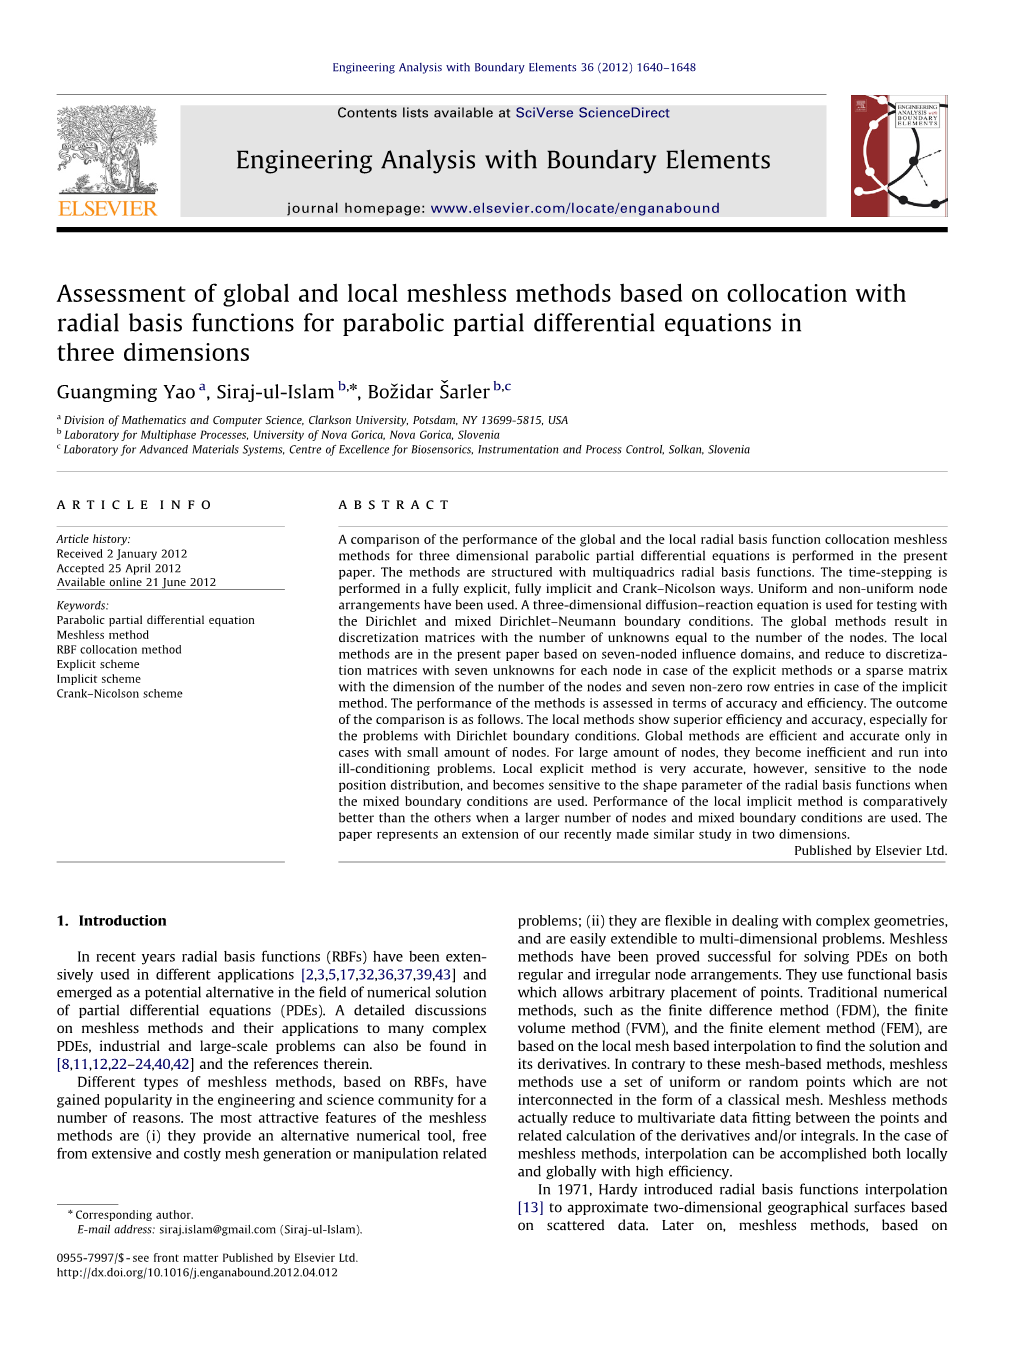 Assessment of Global and Local Meshless Methods Based on Collocation with Radial Basis Functions for Parabolic Partial Differential Equations in Three Dimensions